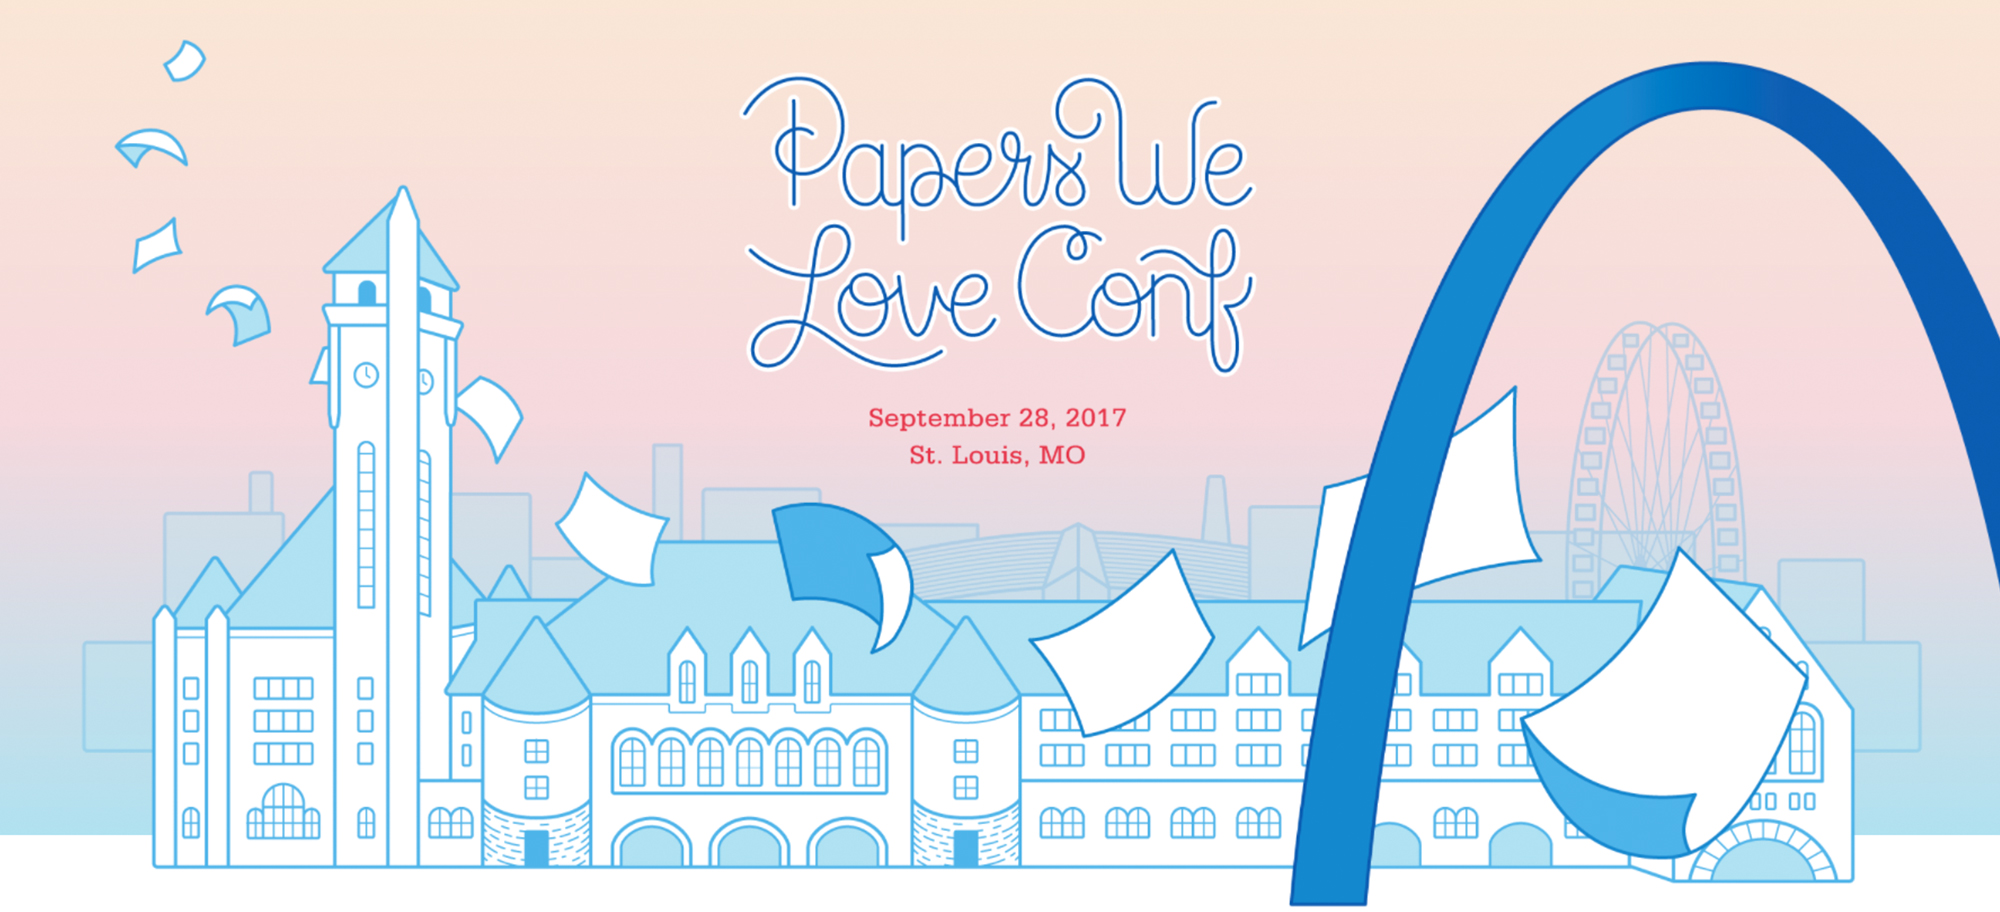 Papers We Love Conf.